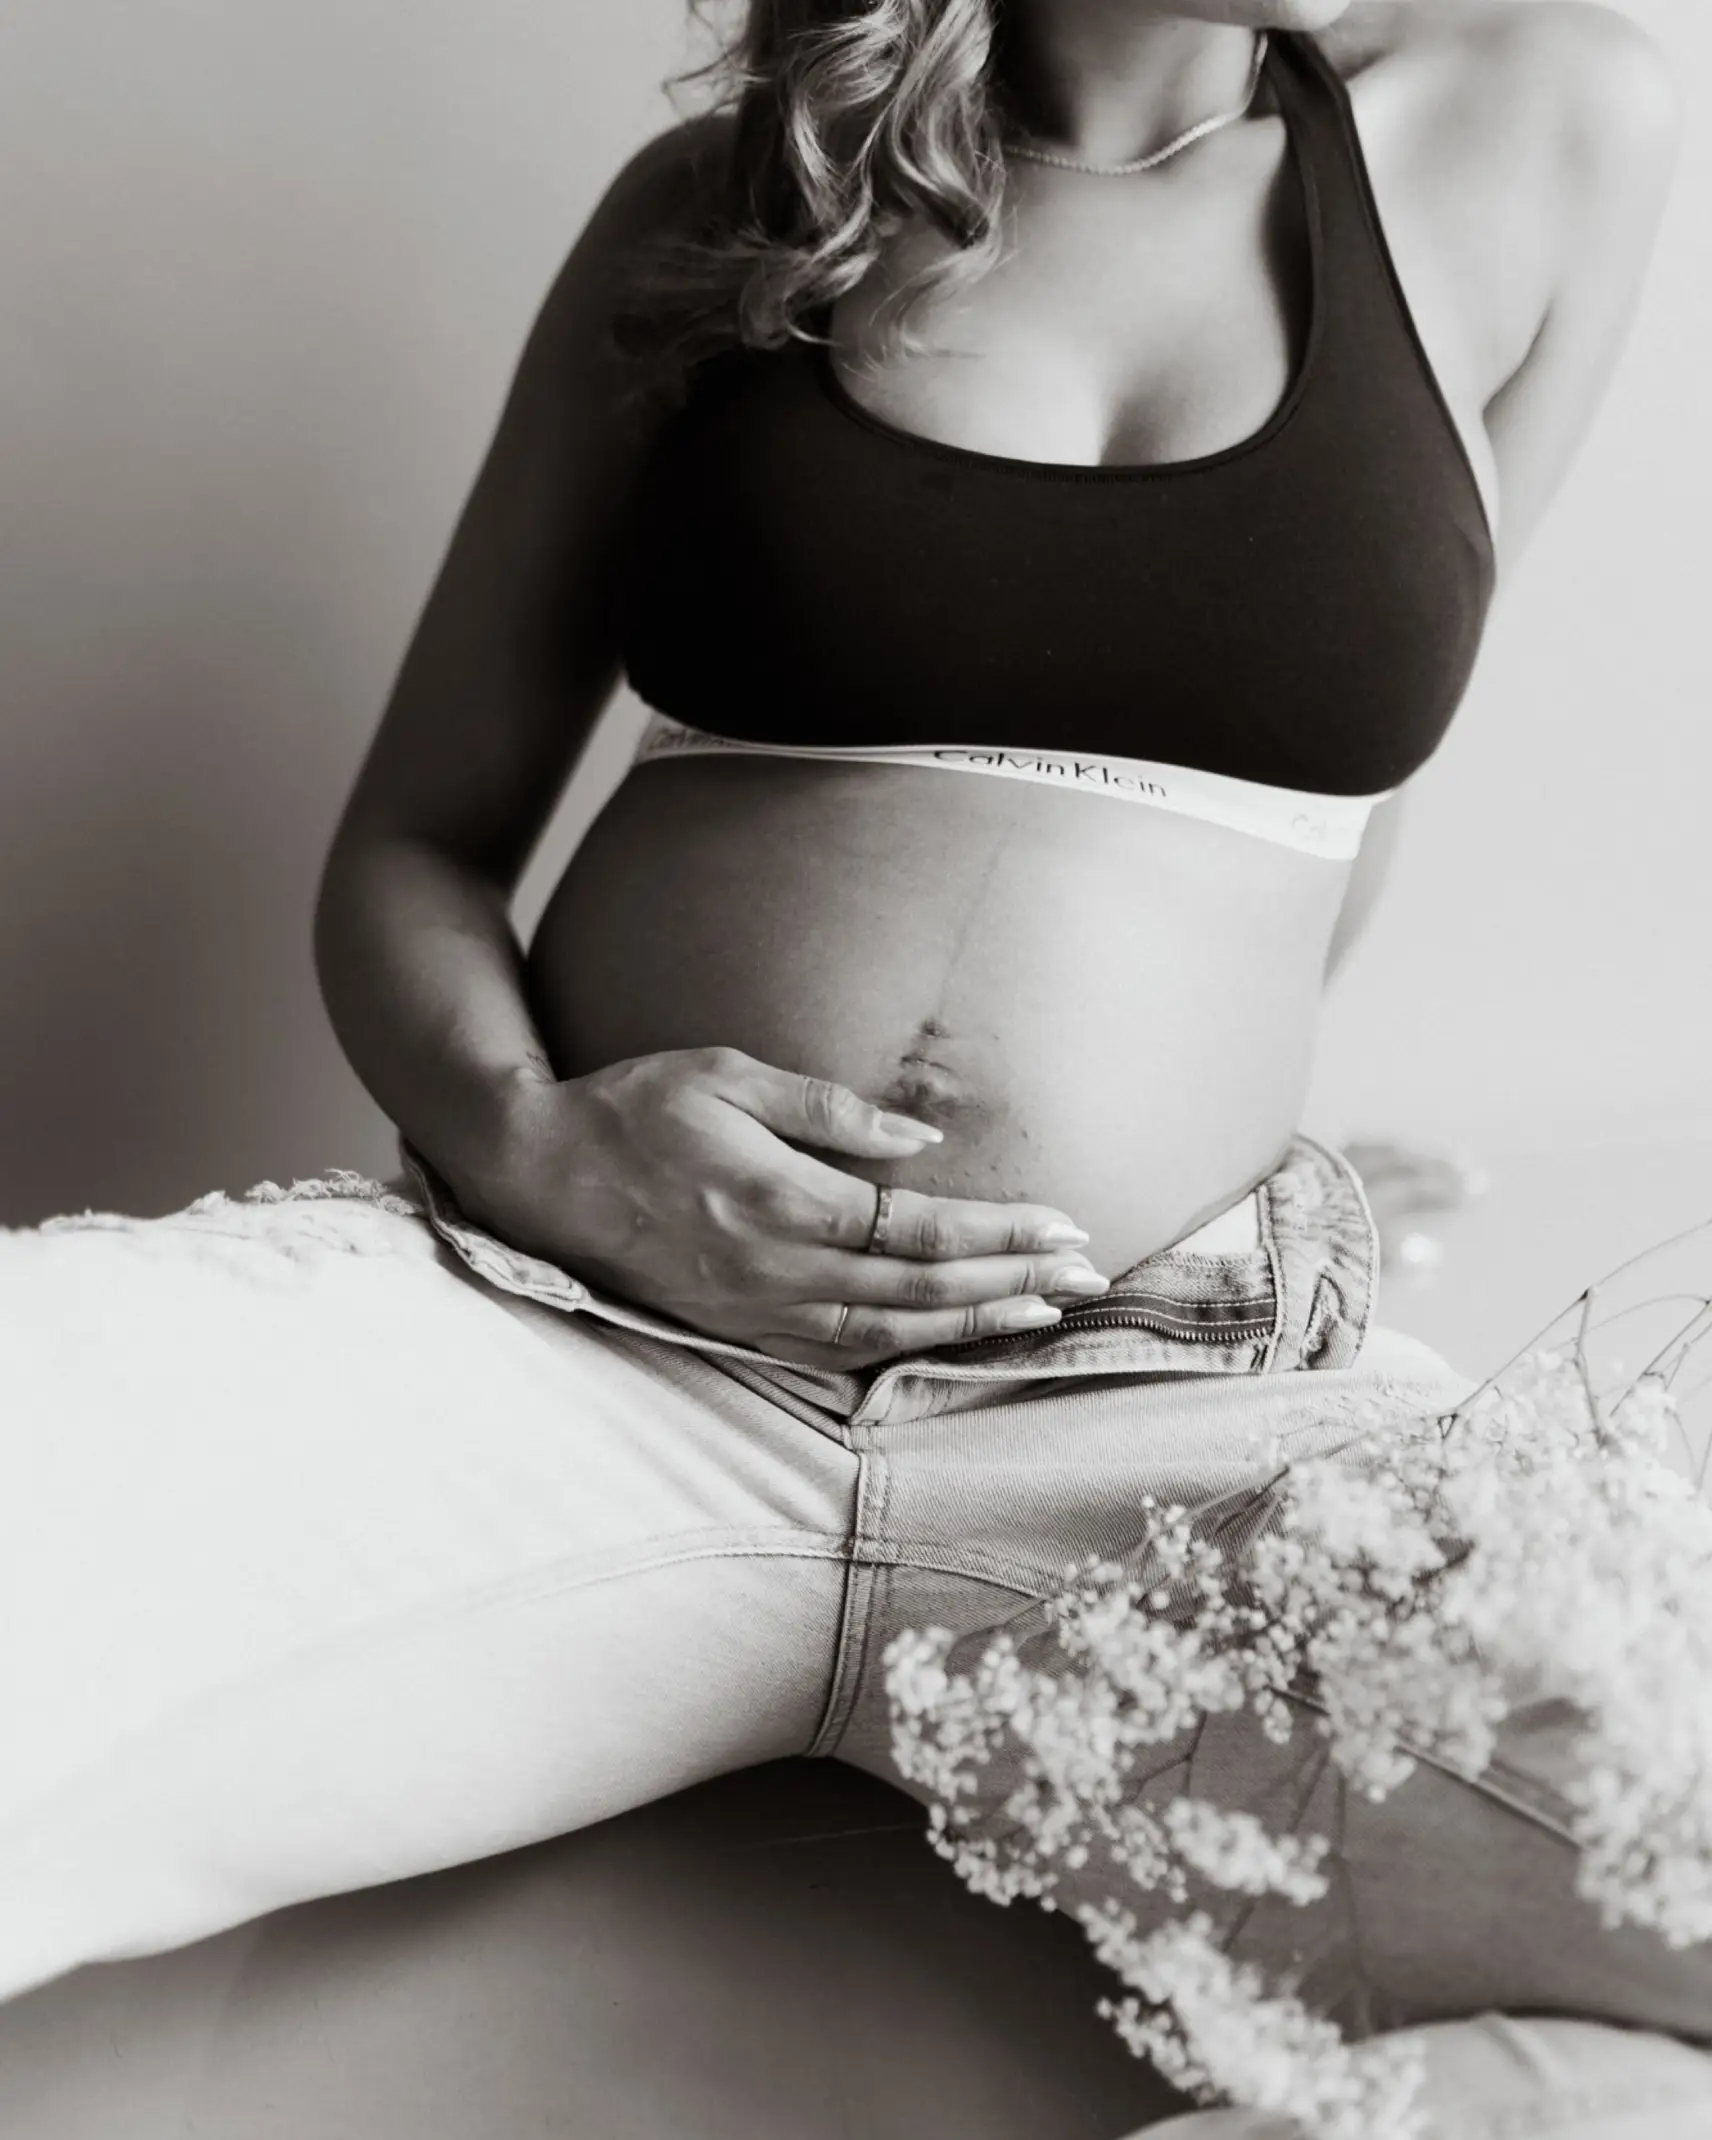 Pregnant Girl In Bra And Pants Sitting On Bed #2 Photograph by